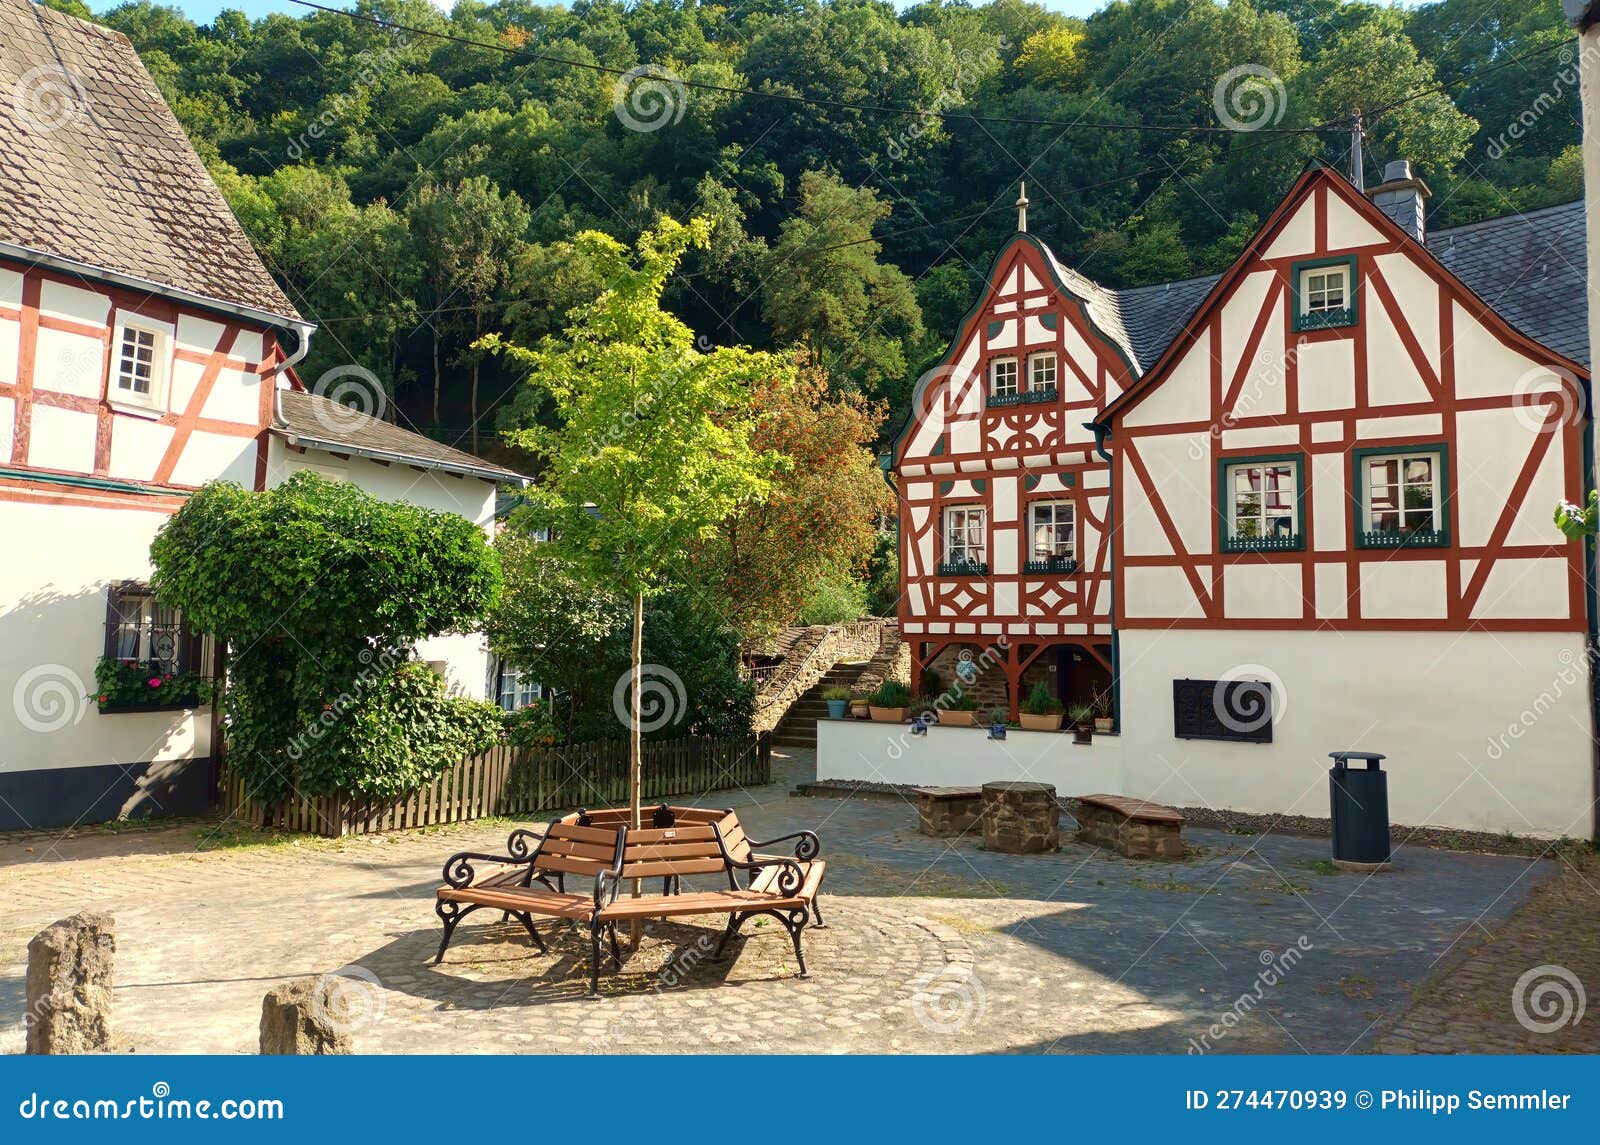 beautiful villages: half timbered houses and a bench inmonreal in rhineland-palatinate